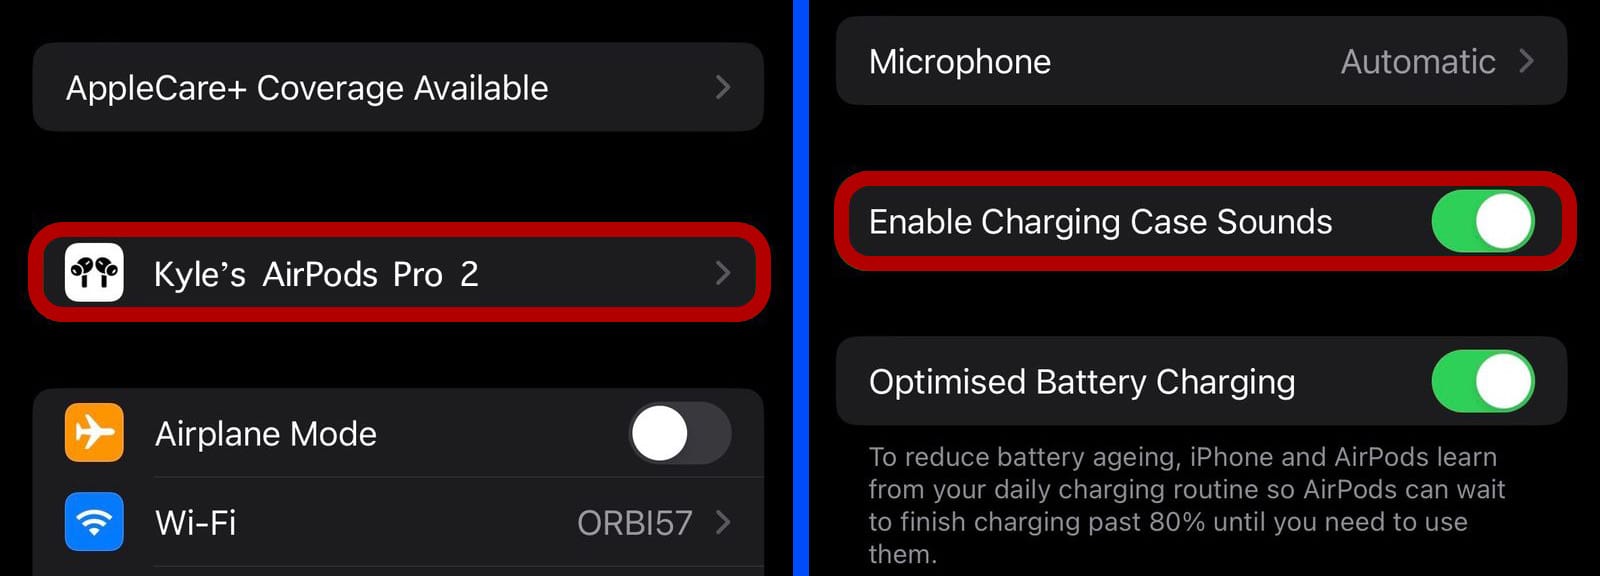 How Enable Or Disable Charging Sounds On AirPods Pro 2 | Gaming X Tech